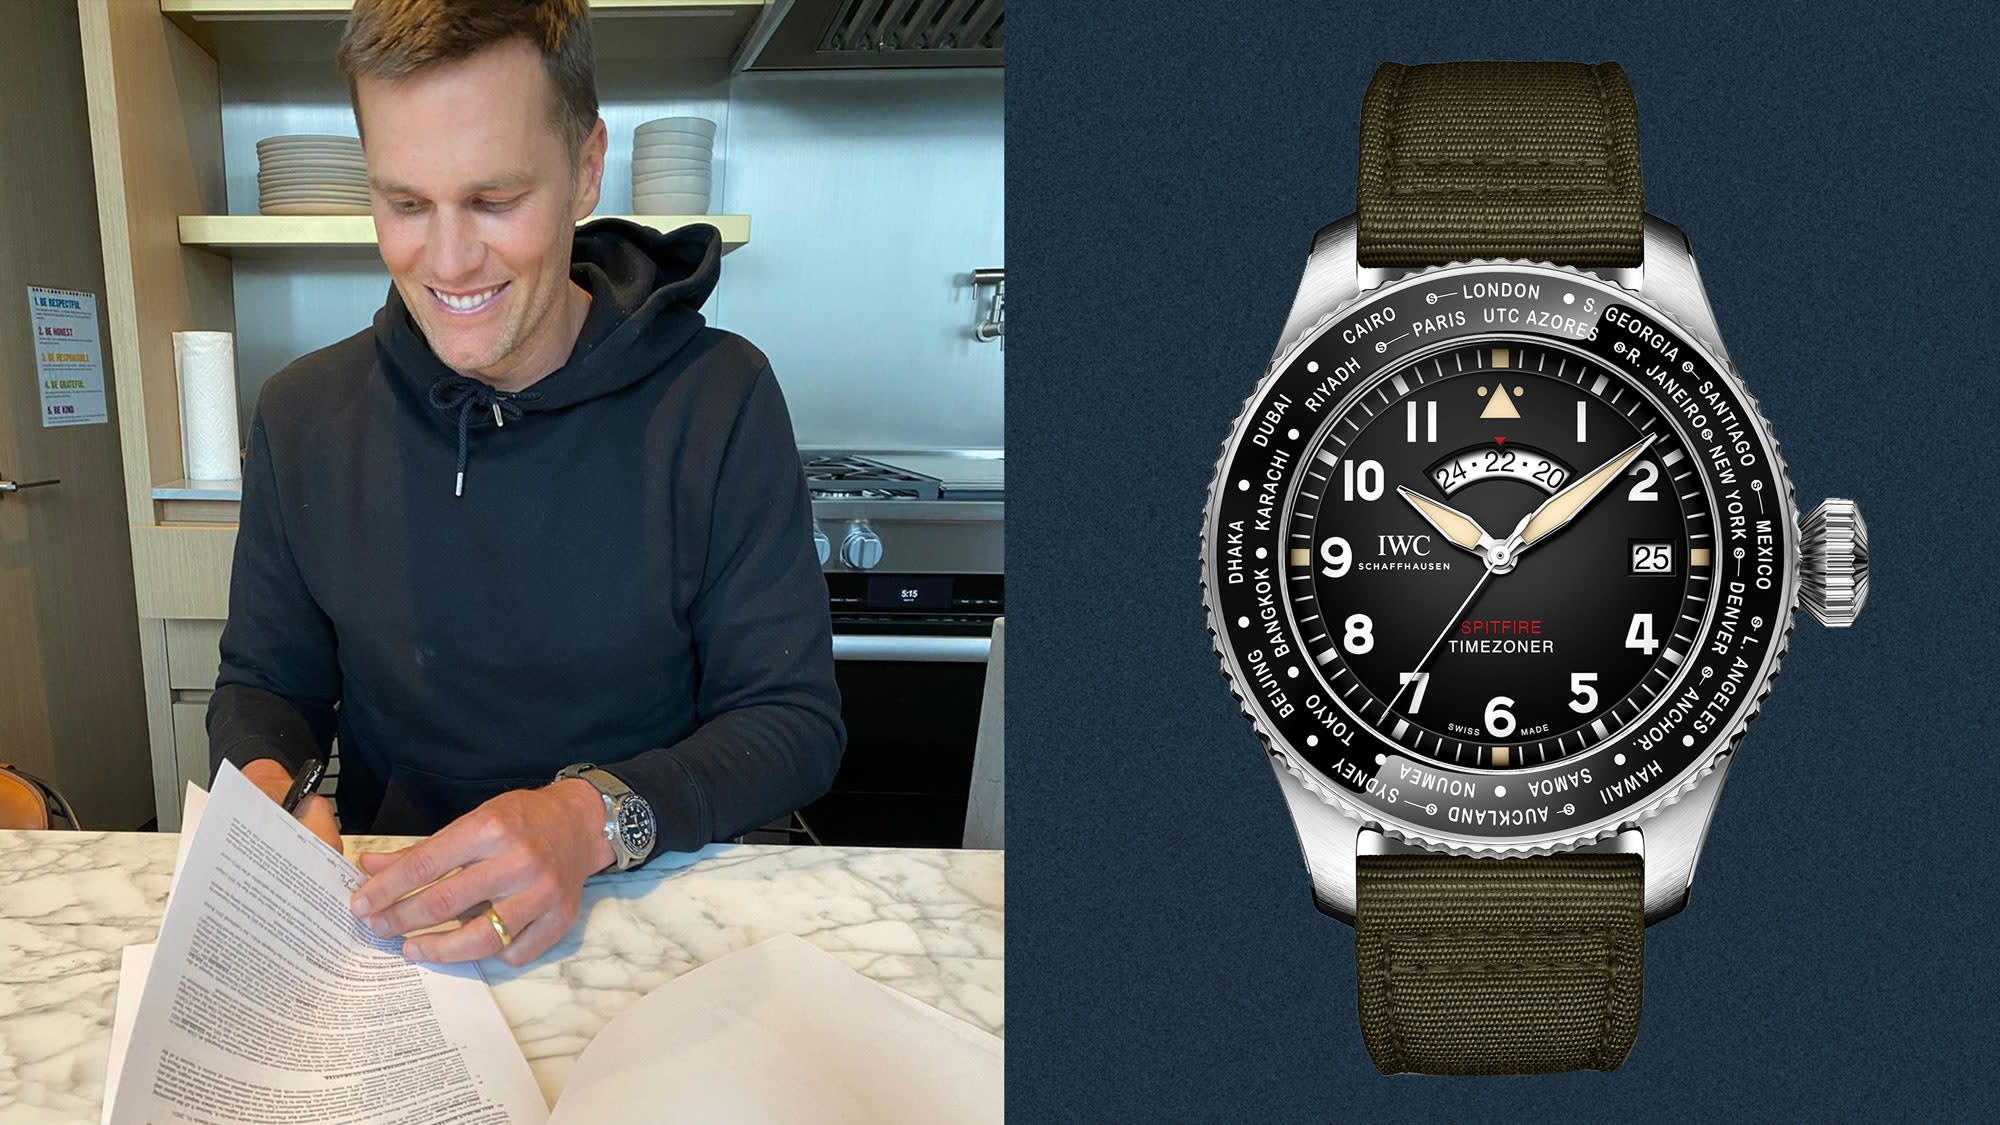 Tom Brady Signed His New Bucs Contract While Wearing An Equally New Watch 8056